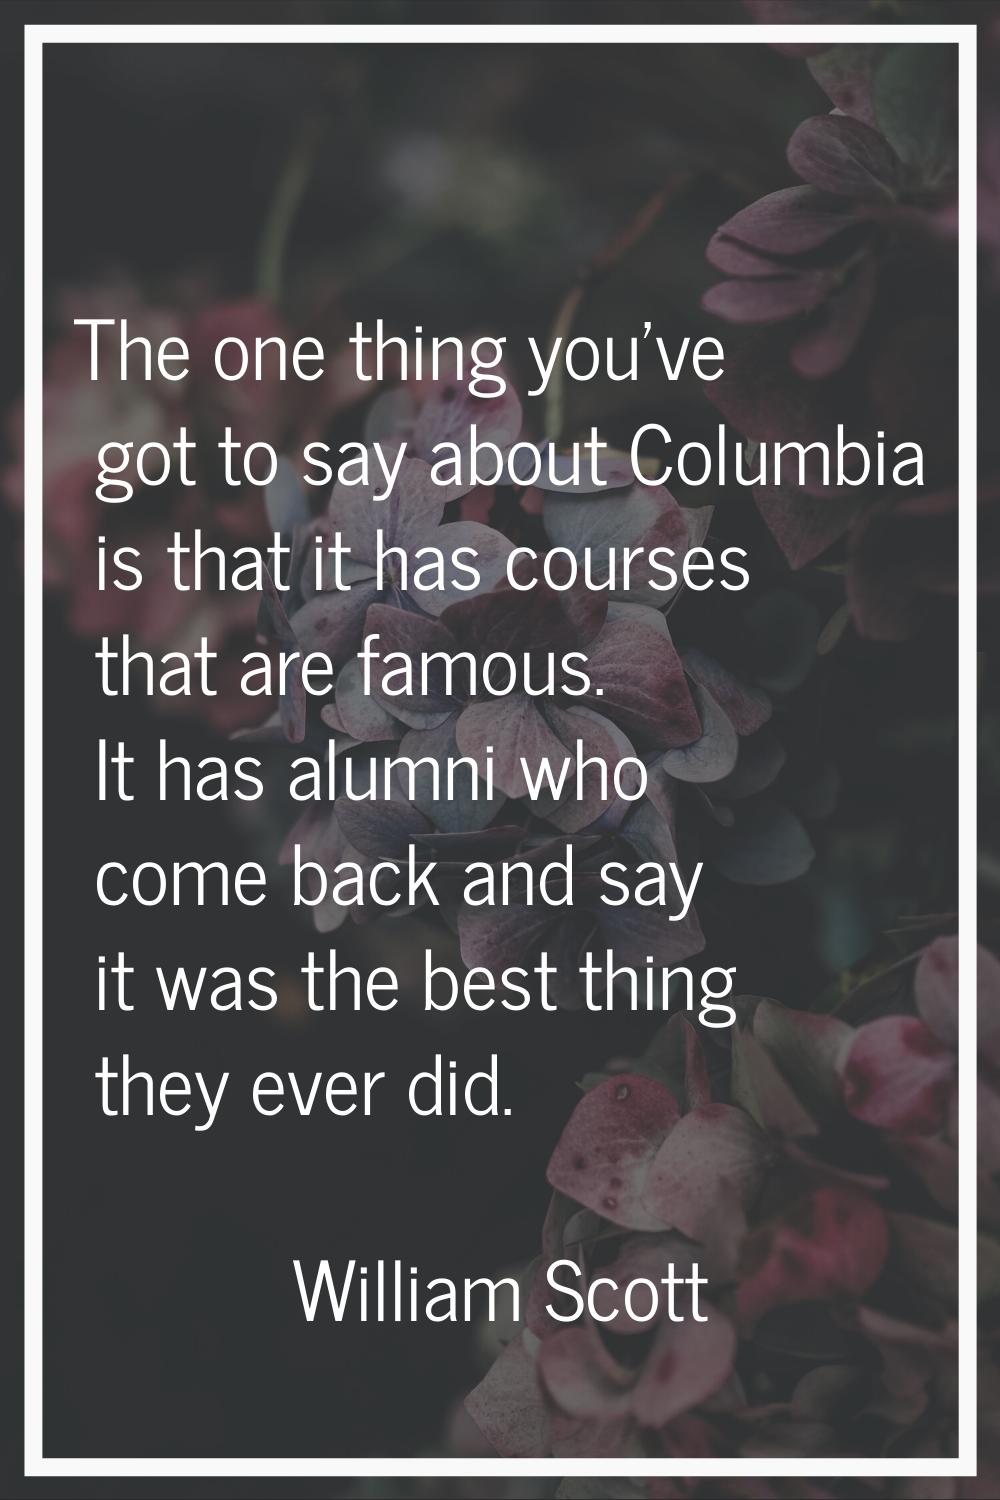 The one thing you've got to say about Columbia is that it has courses that are famous. It has alumn